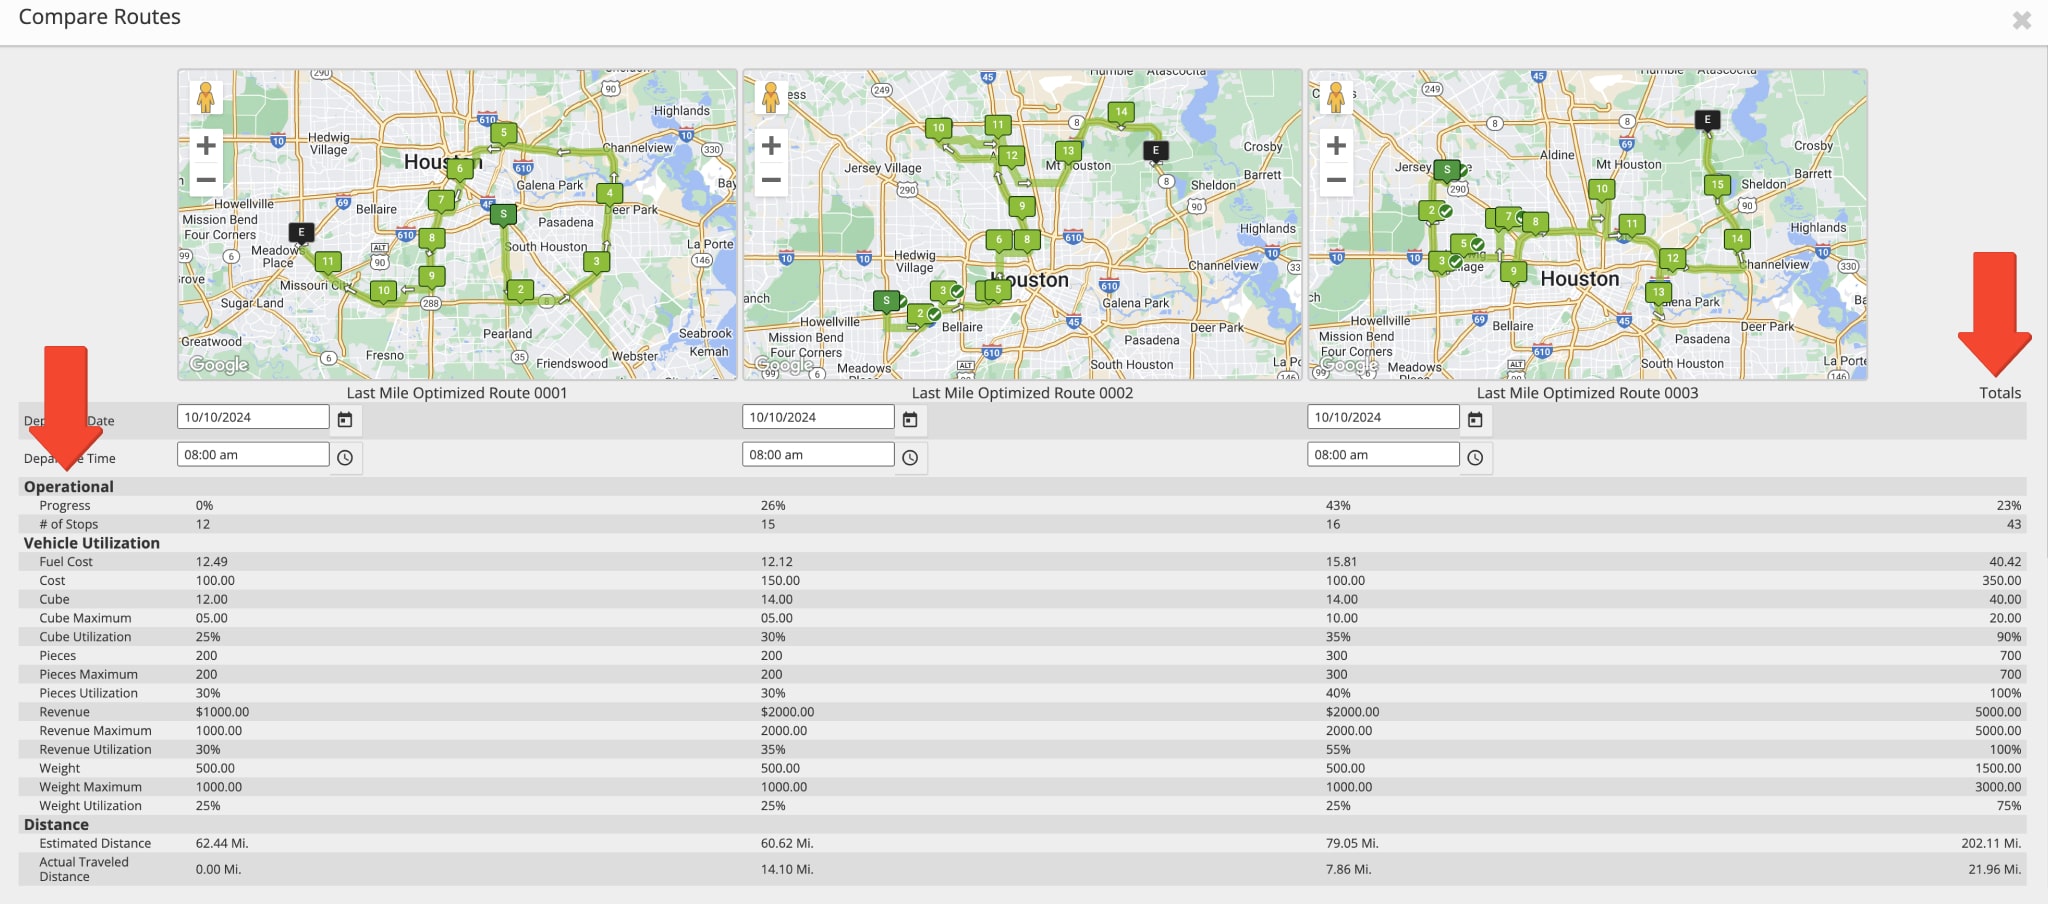 Compare route totals side by side: route distance, route travel time, route progress, vehicle utilization, and more.